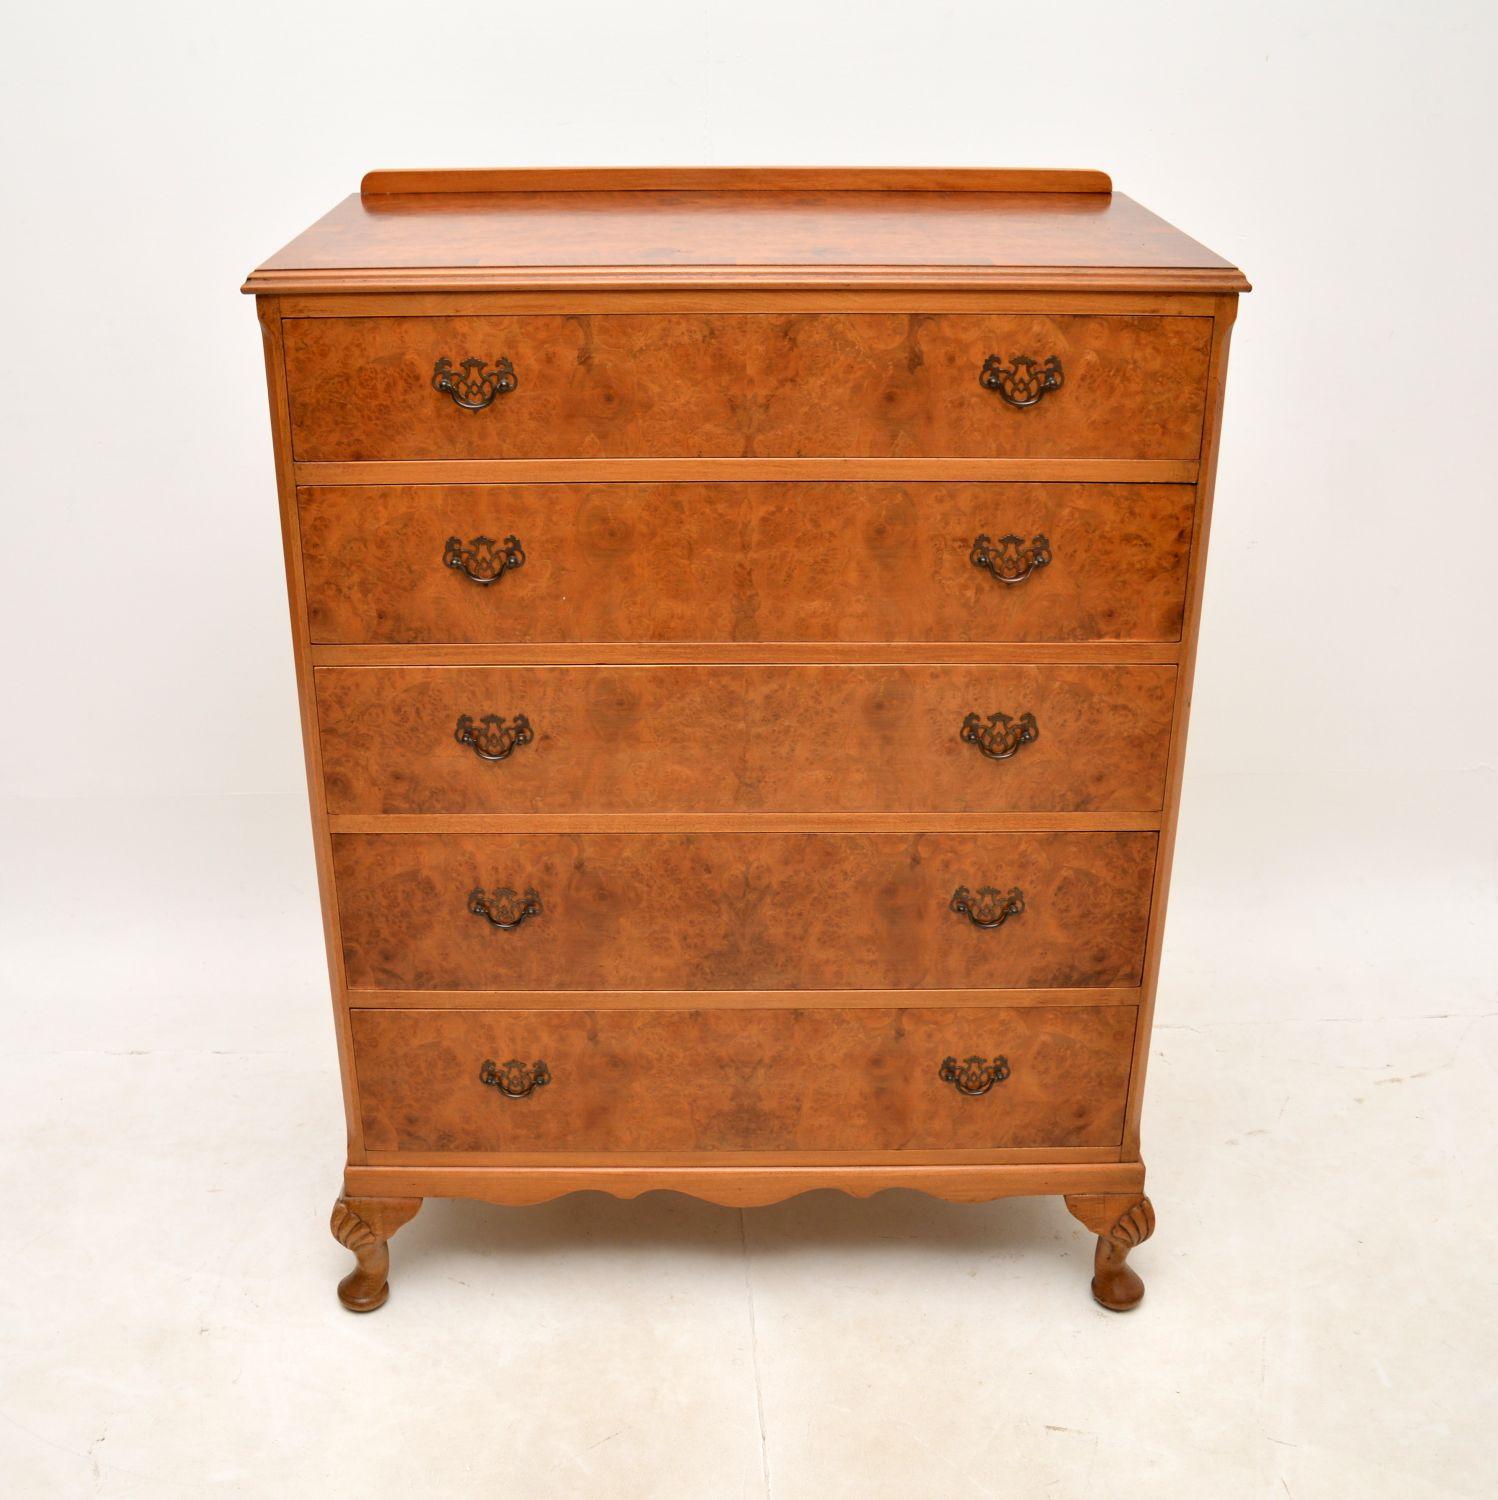 A beautiful antique burr walnut chest of drawers in the Queen Anne style. This was made in England, it dates from around the 1930’s.

The quality is fantastic, this is a very useful size with lots of storage space. The burr walnut grain patterns and